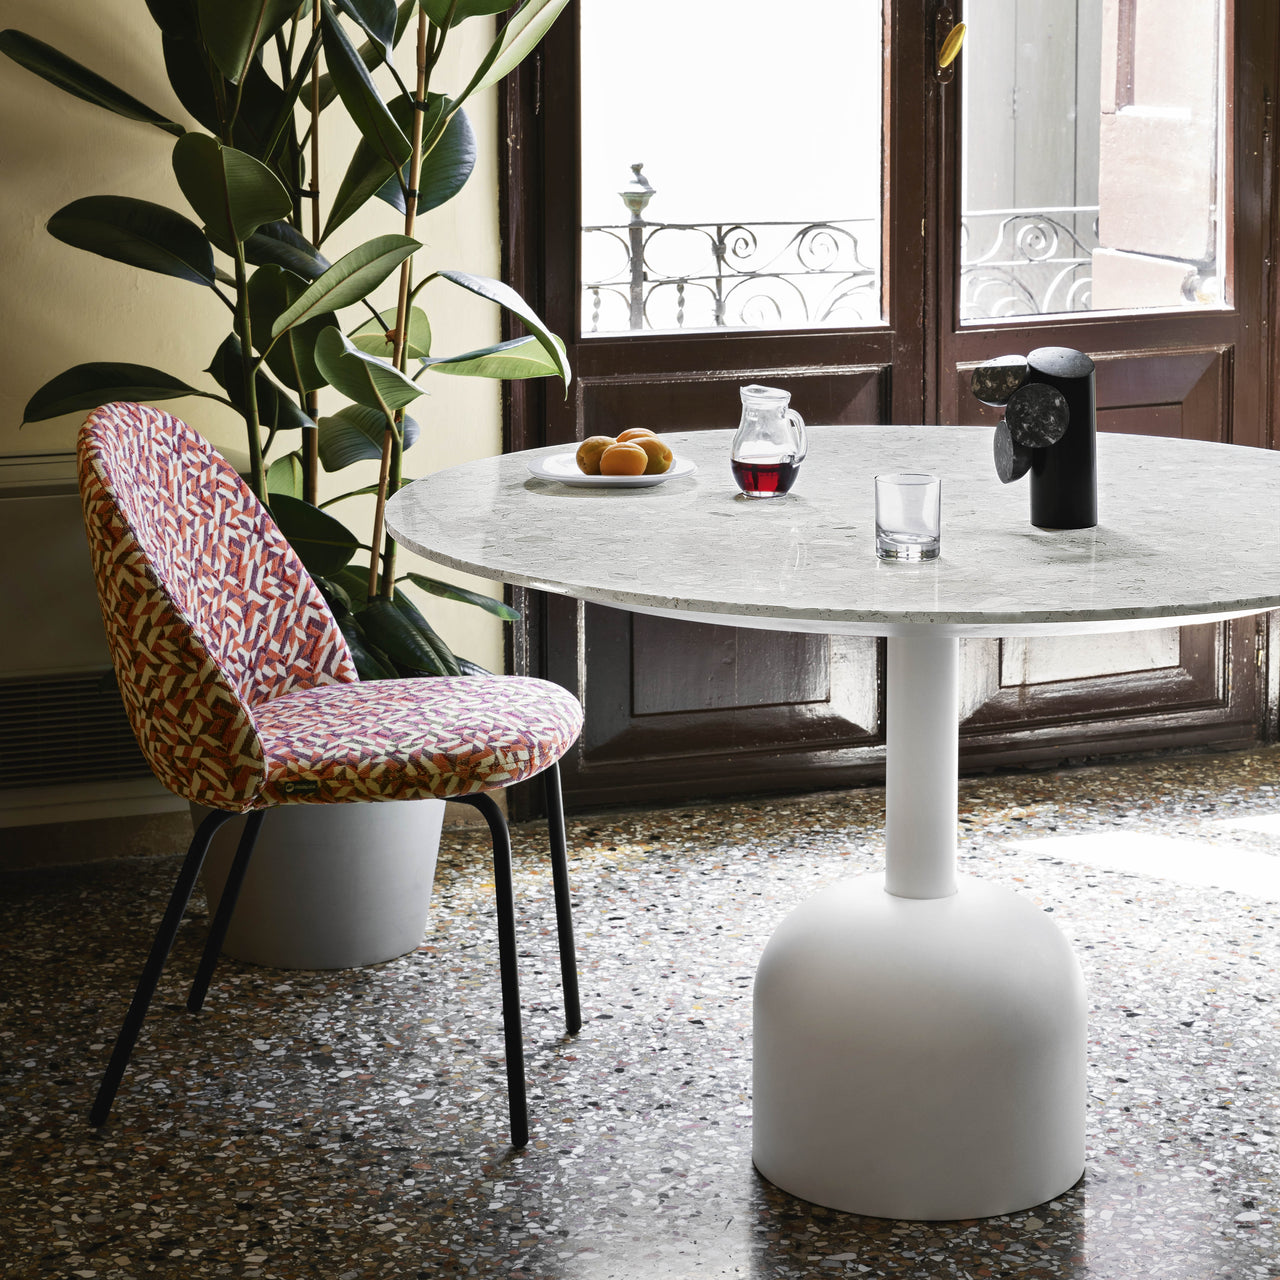 Illo Large Round Dining Table